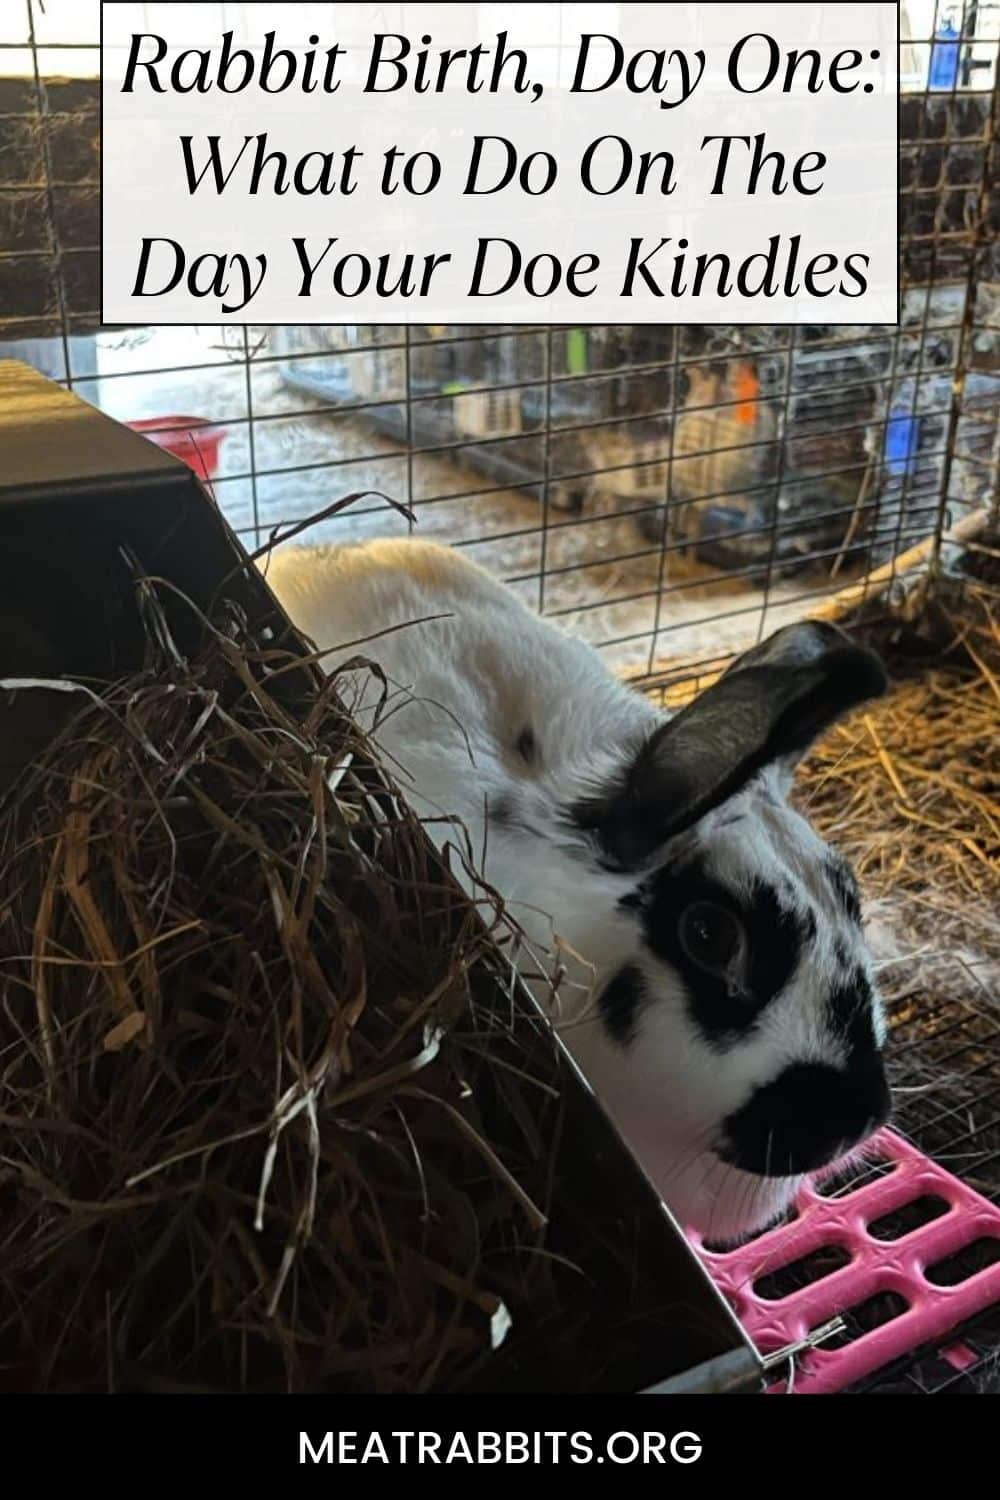 Rabbit Birth, Day One: What to Do On The Day Your Doe Kindles pinterest image.